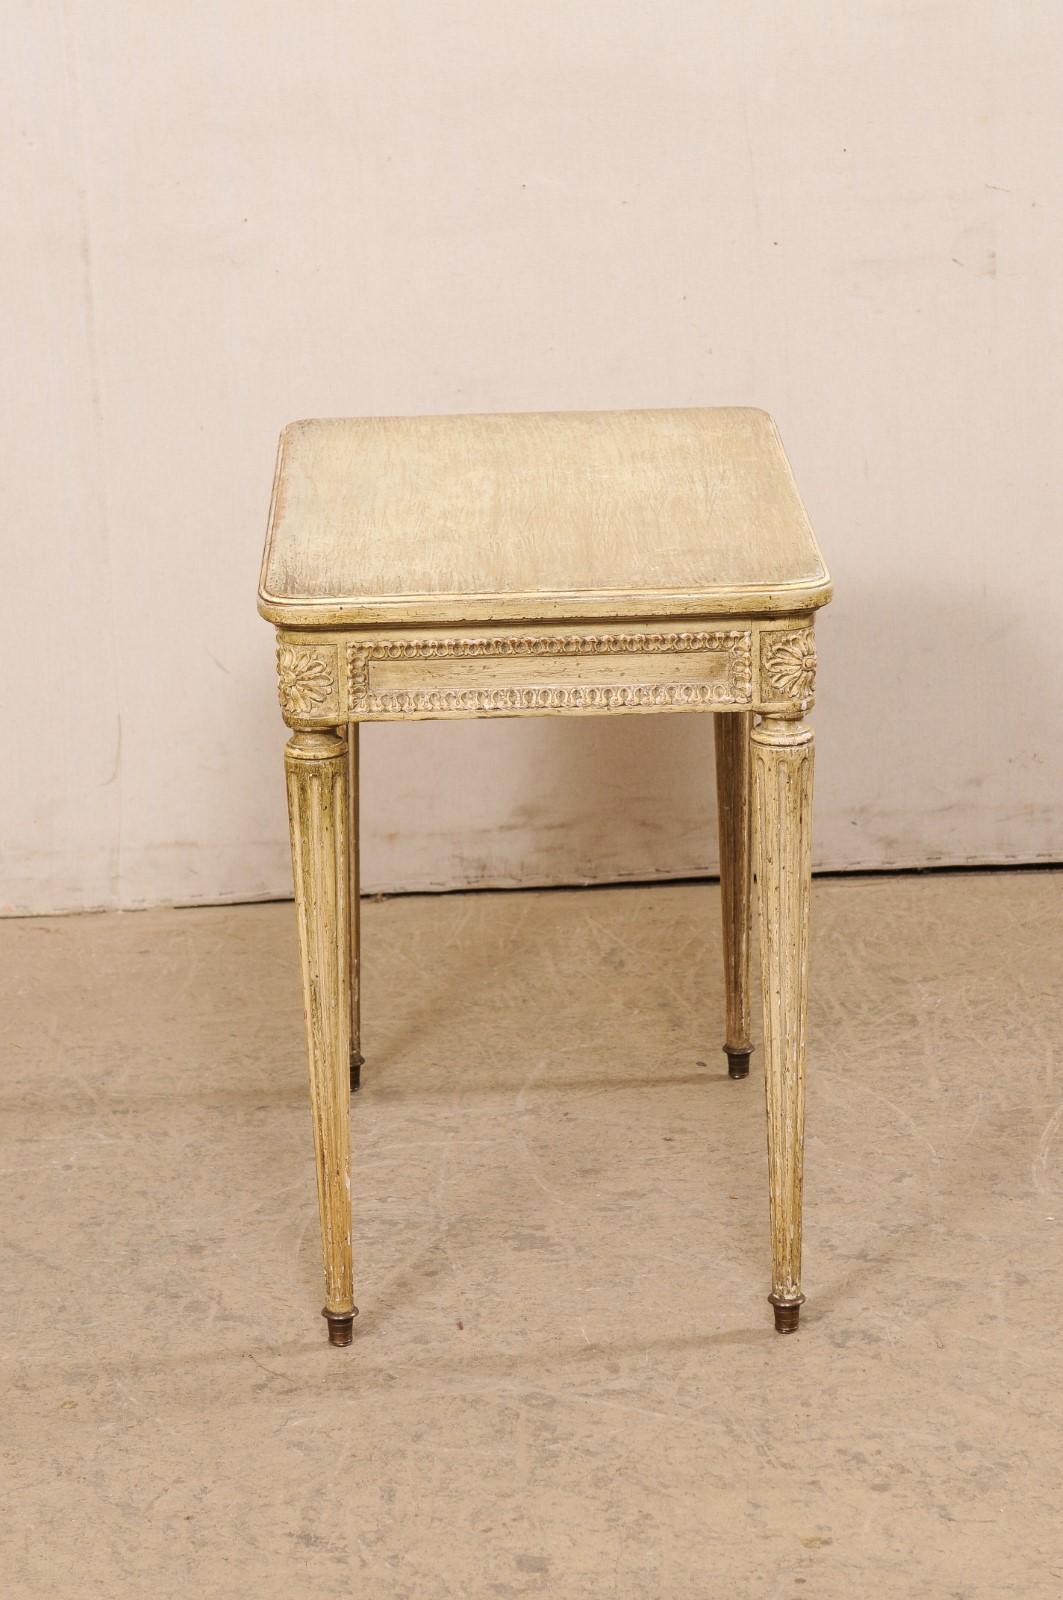 Louis XVI Style French Side Table with its Original Painted Finish Early 20th C. For Sale 5